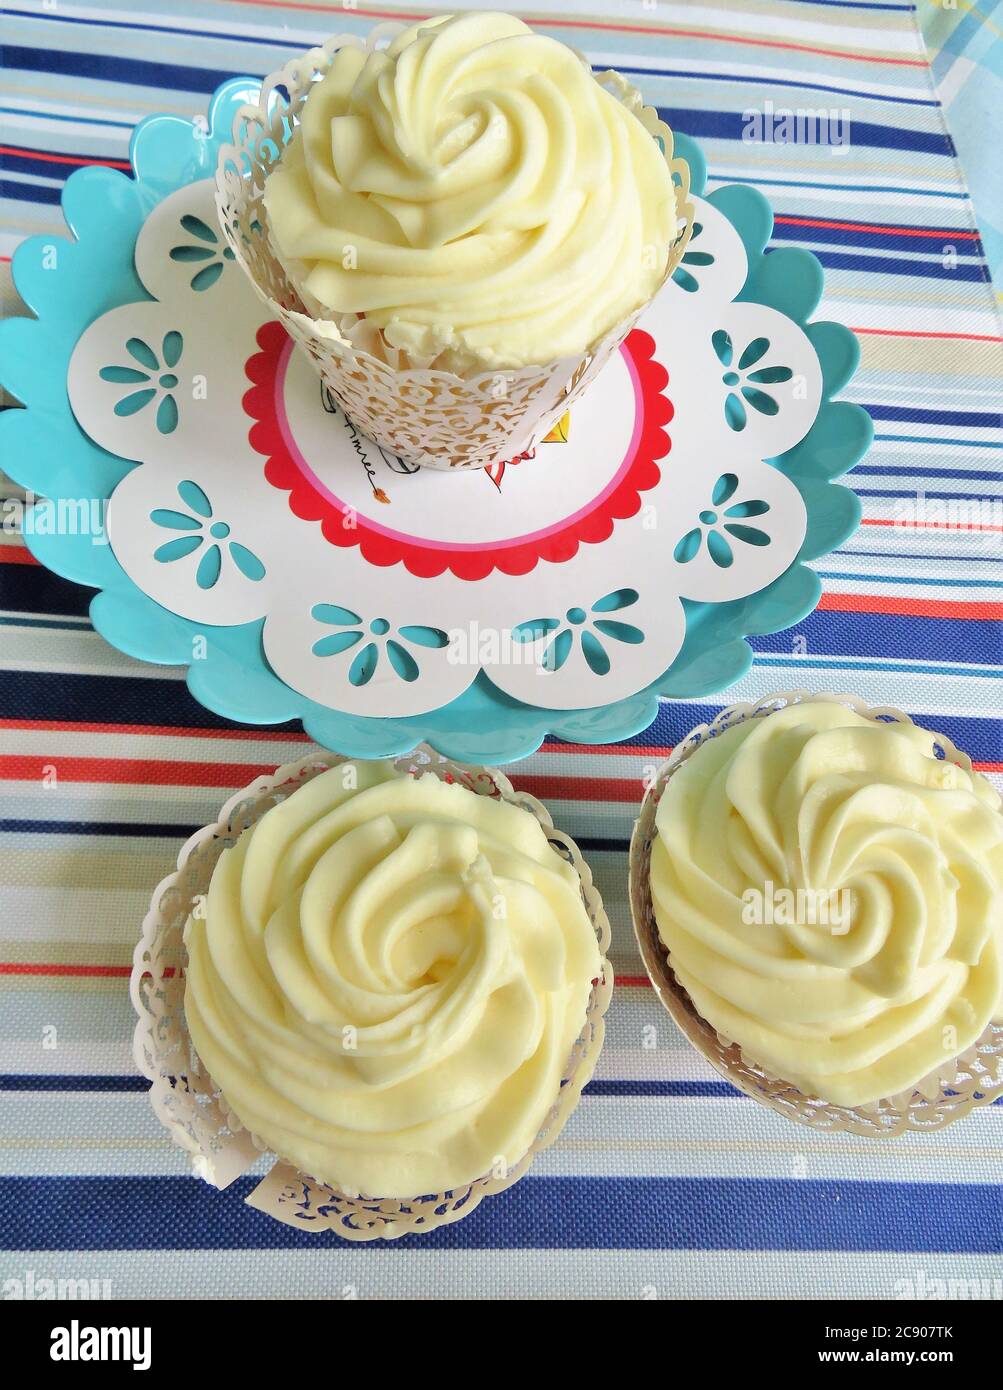 Cupcakes decorated with a vanilla frosting for birthdays, weddings, or showers Stock Photo